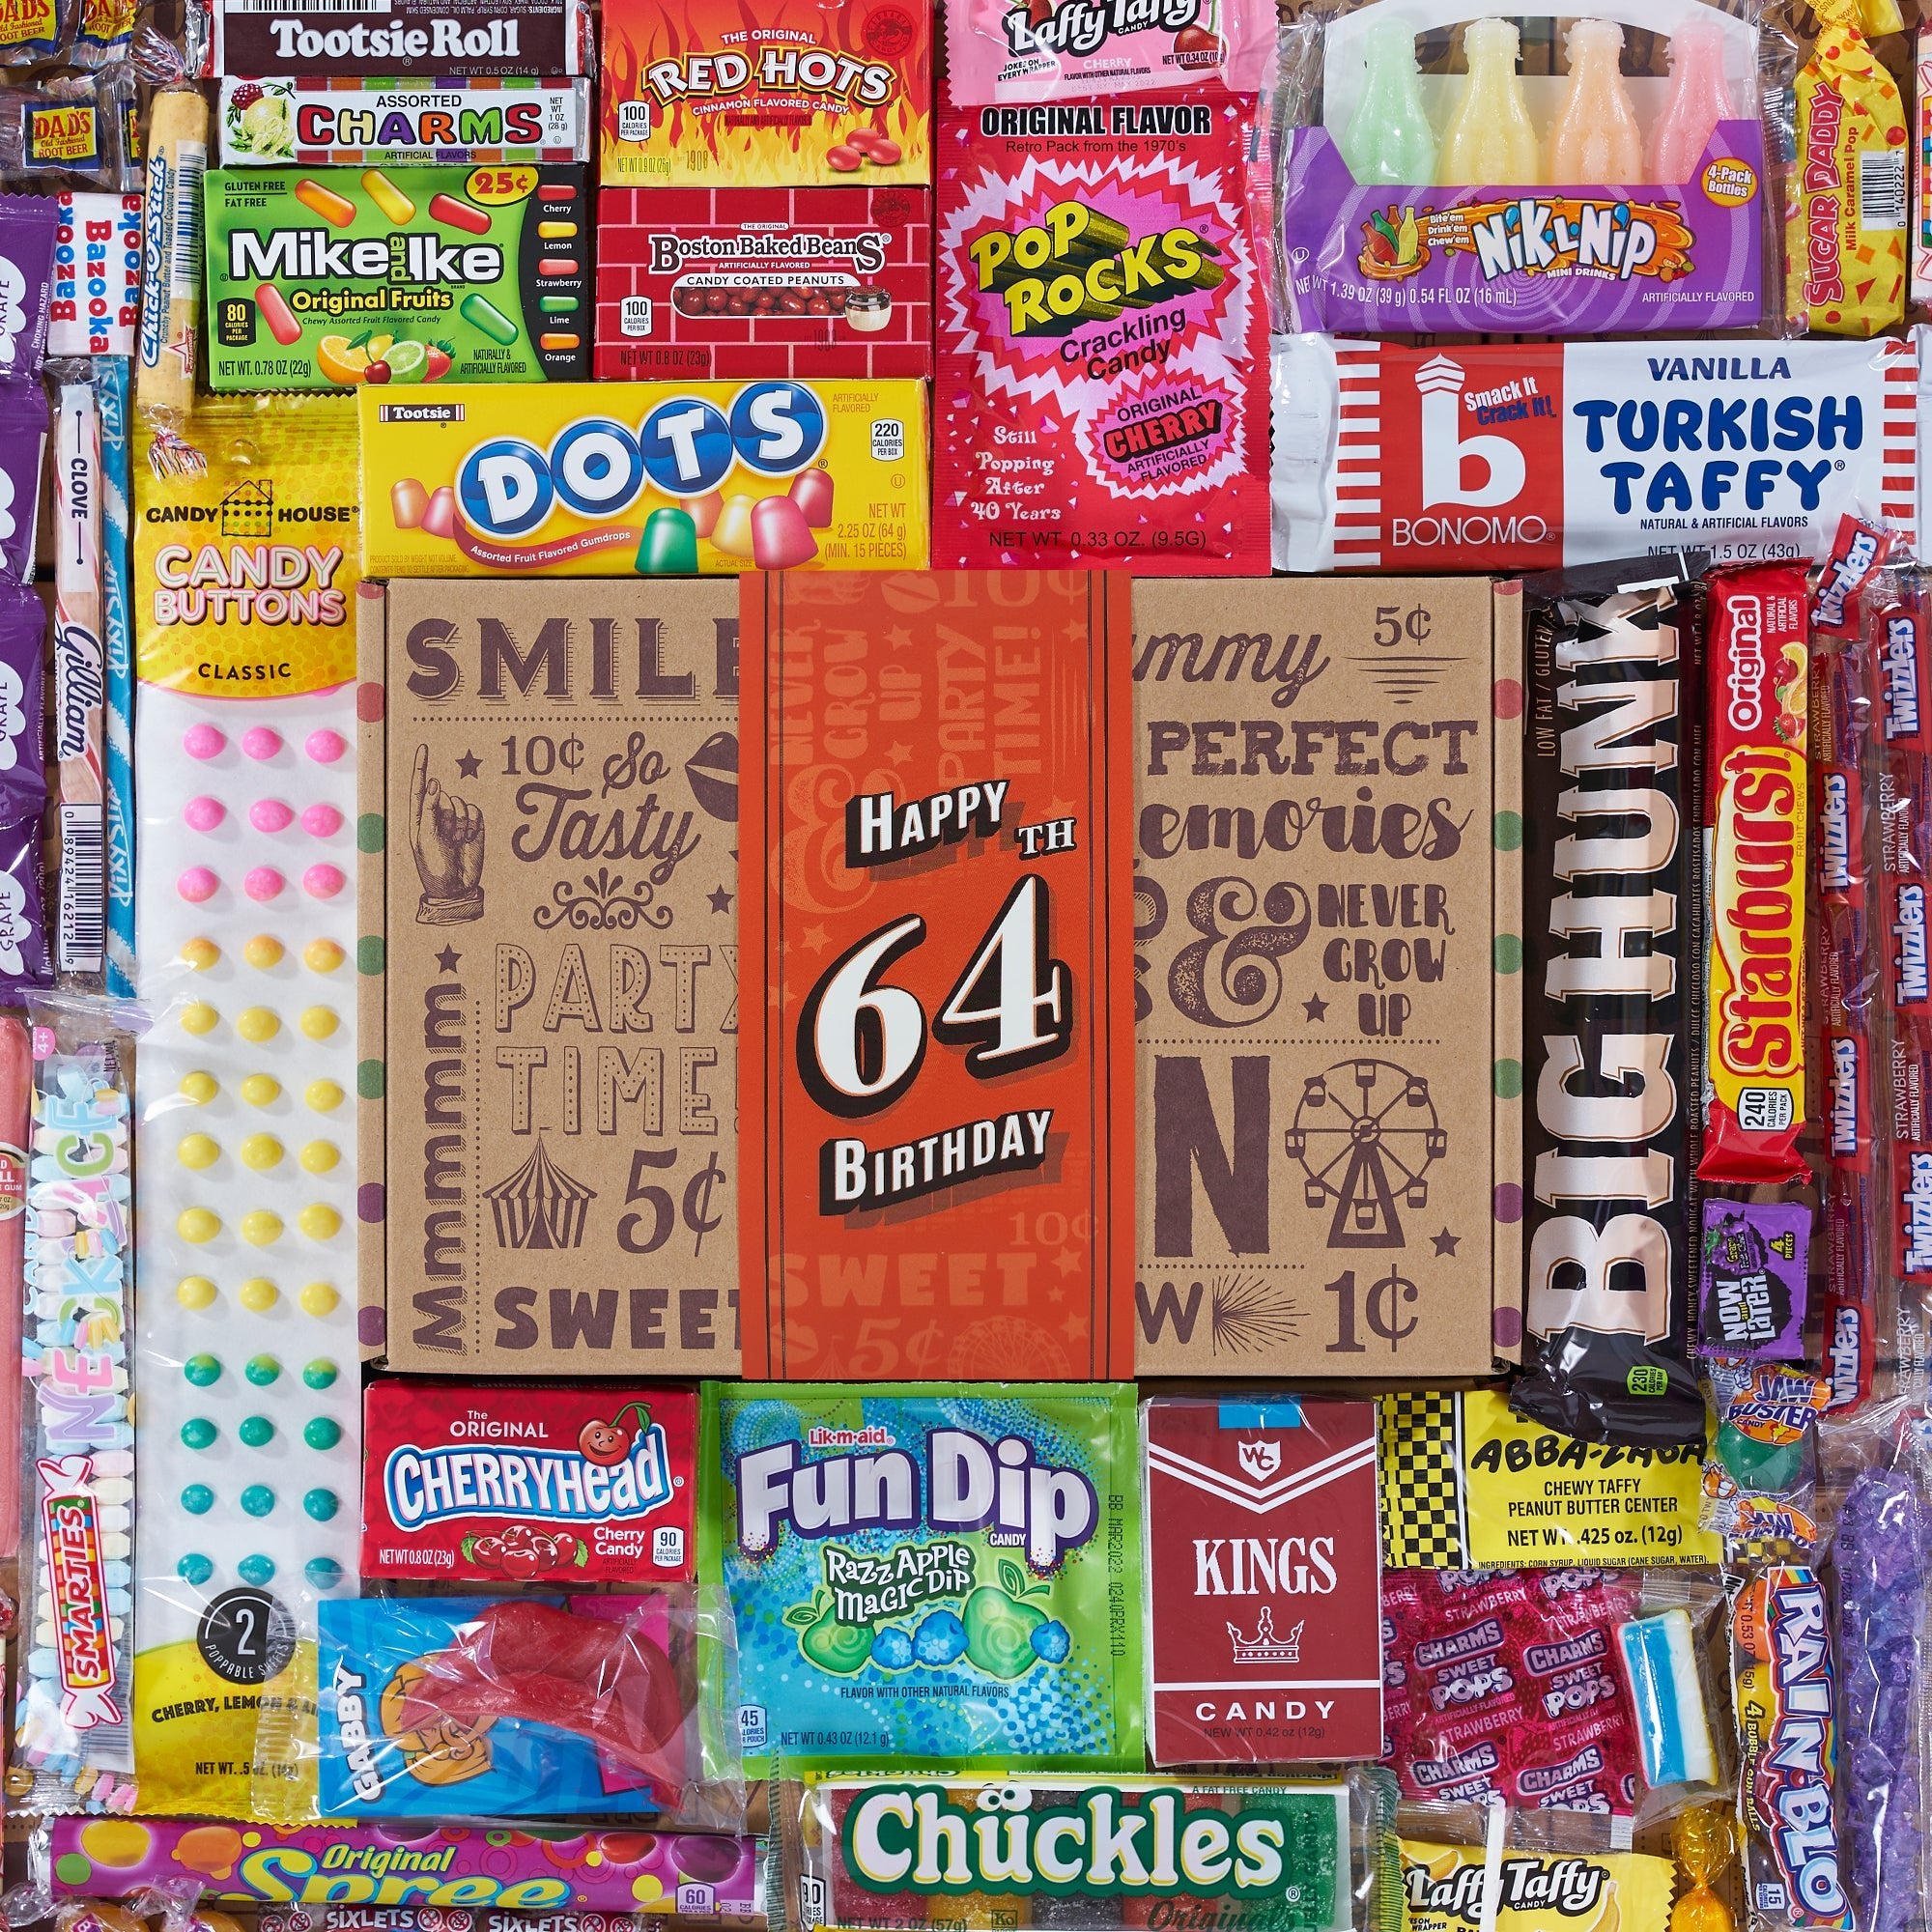 64th Birthday Retro Candy Gift - Vintage Candy Co.